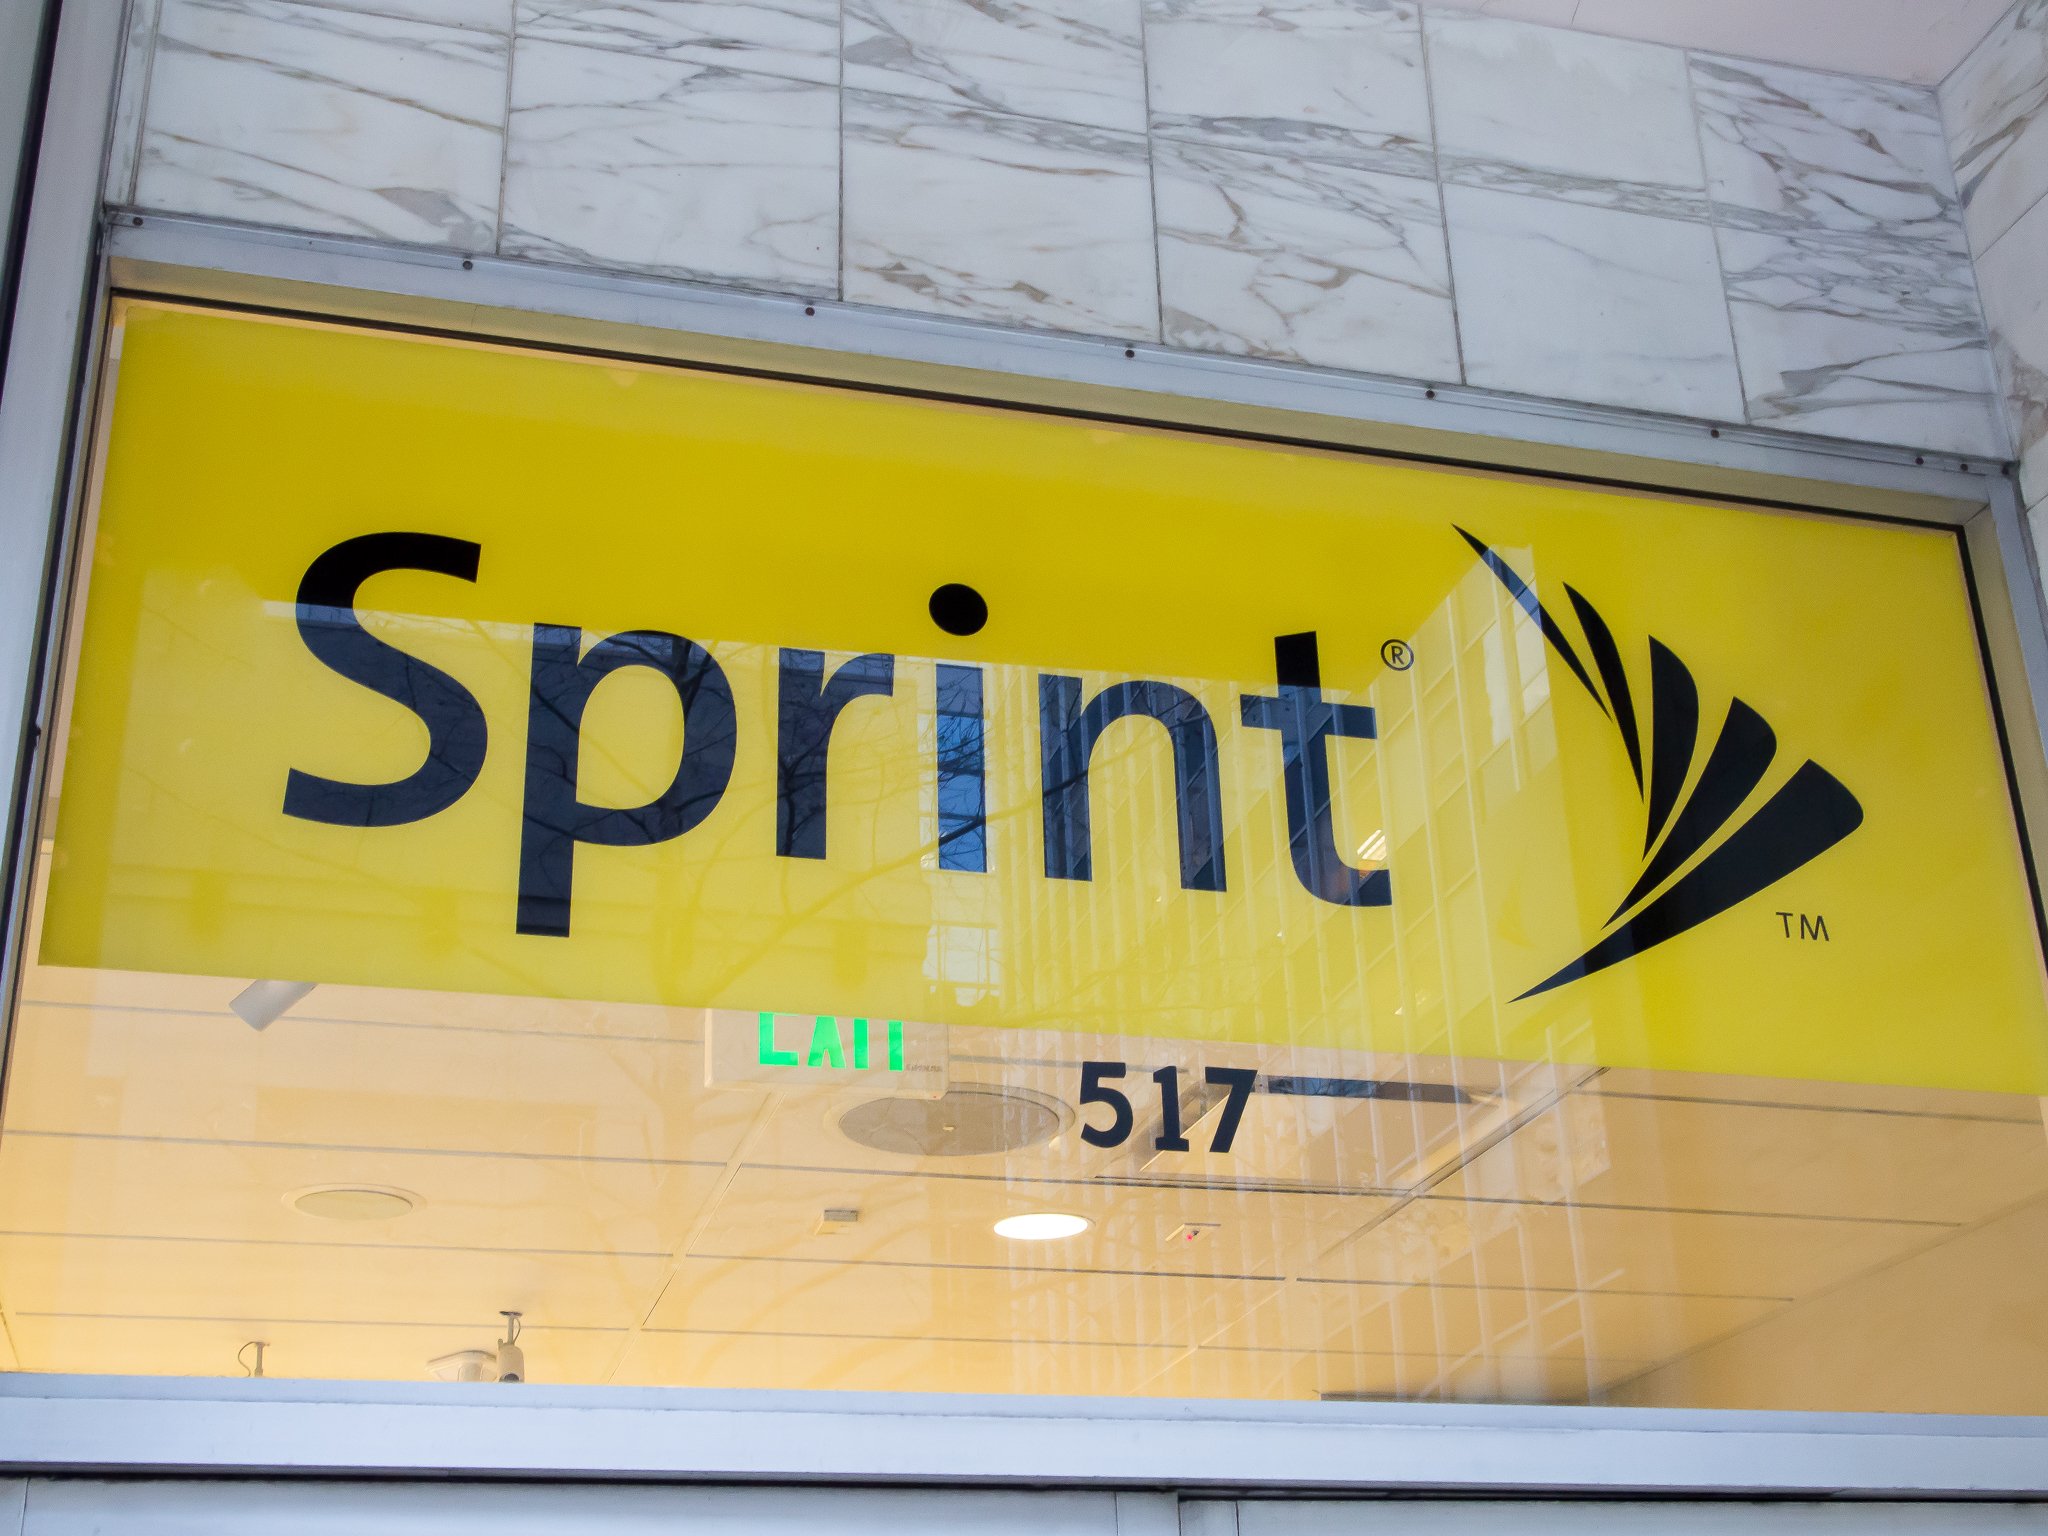 Sprint subscribers will soon be able to roam in Cuba